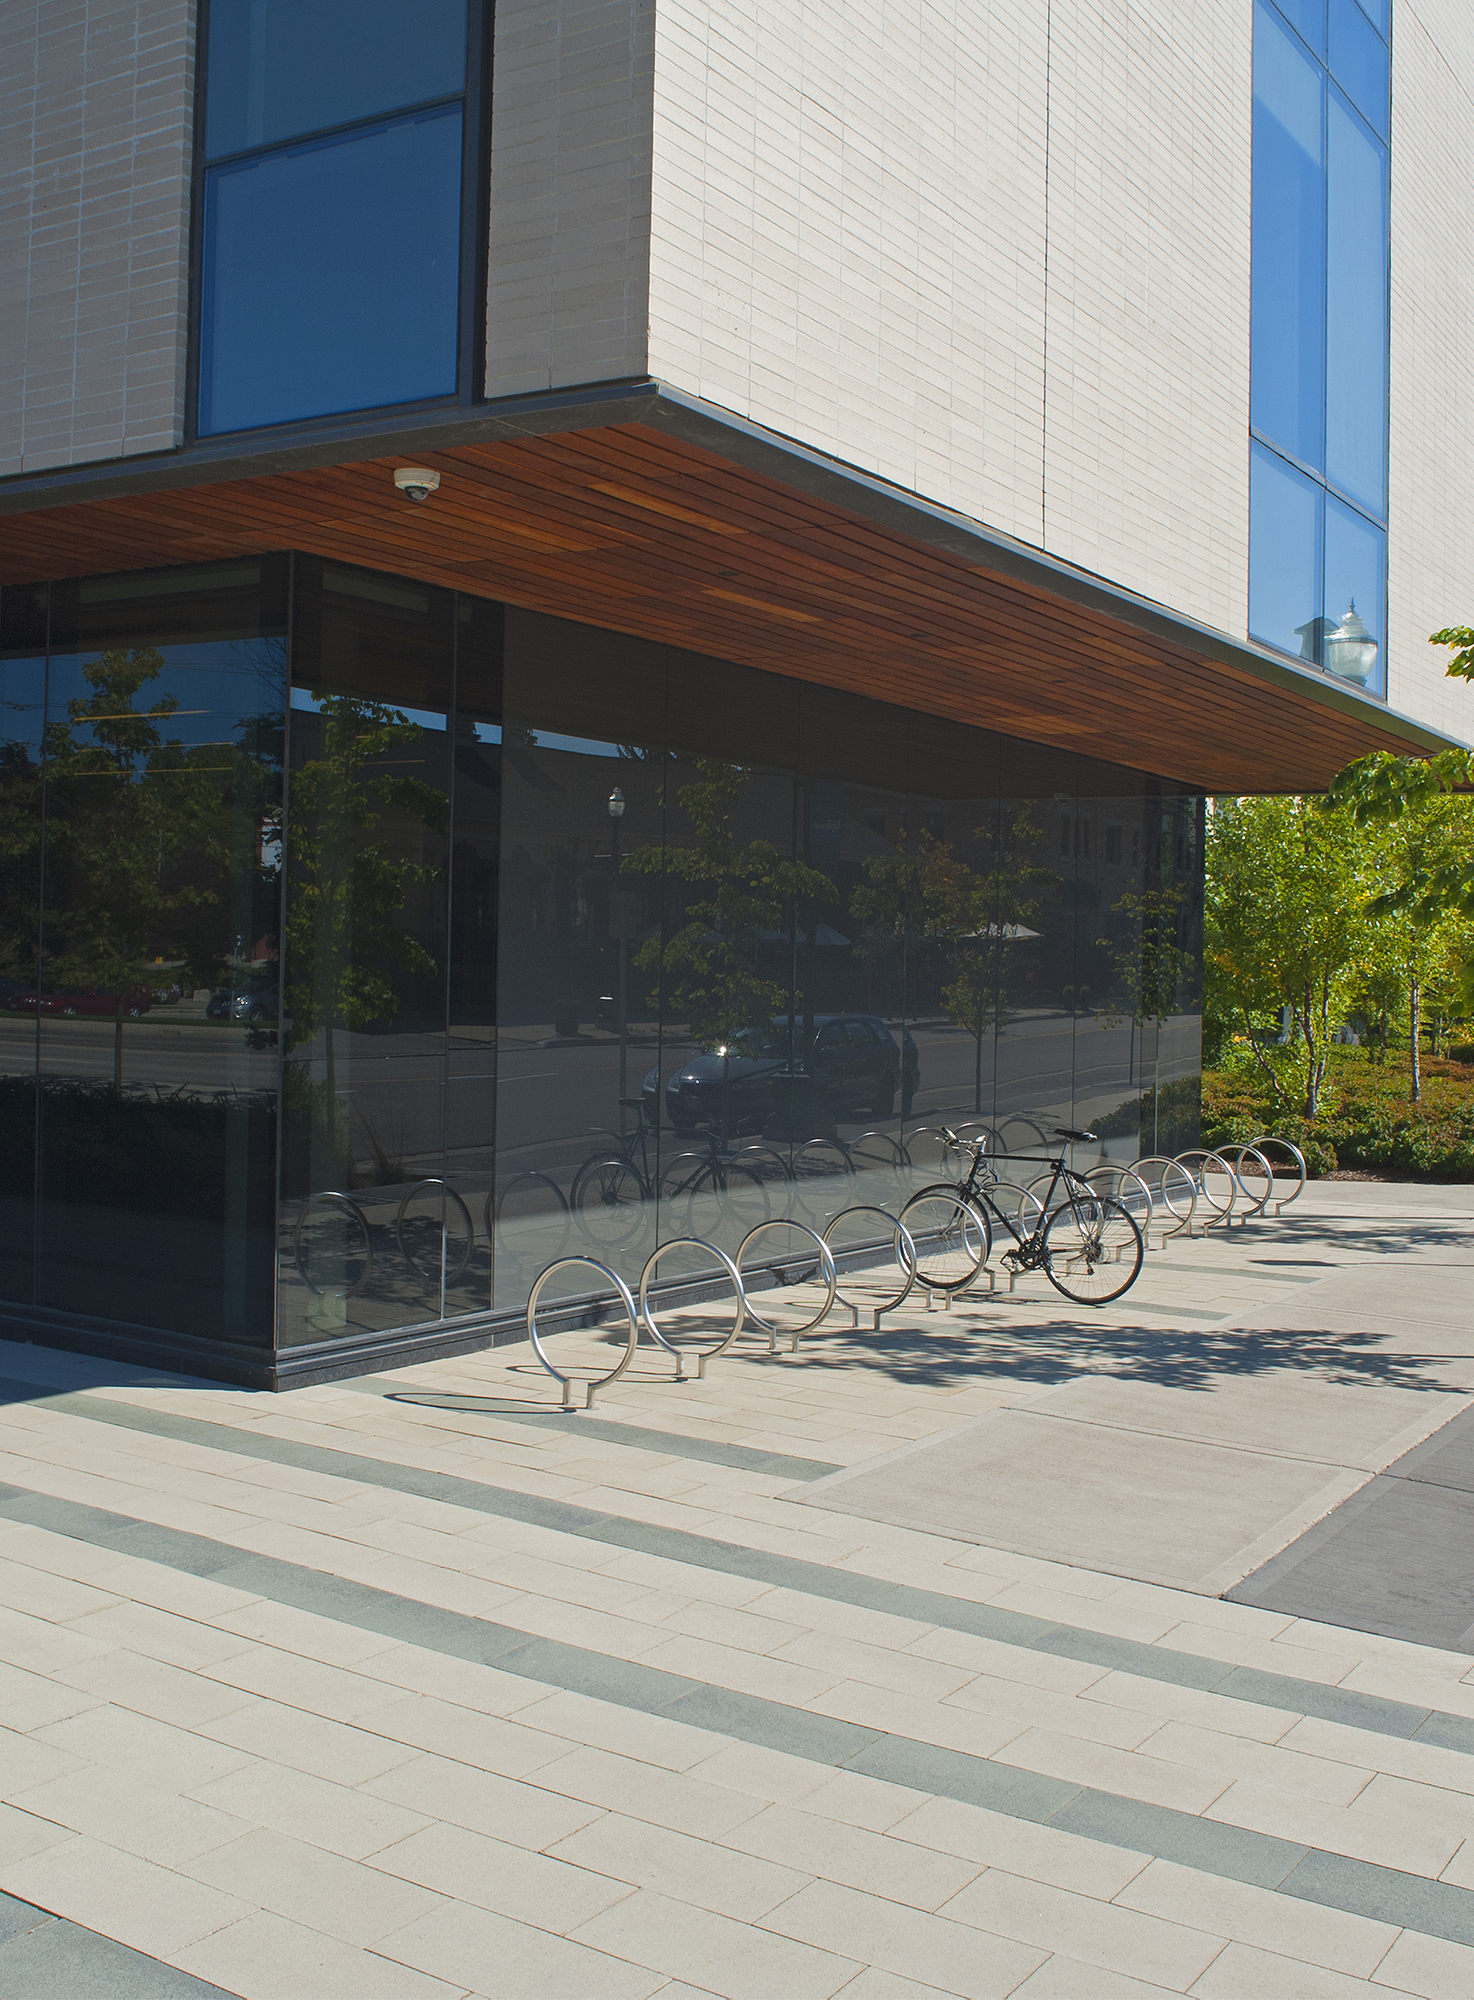 Bake racks along the glass exterior of CIGI building on Umbriano paving bed with softscaping.